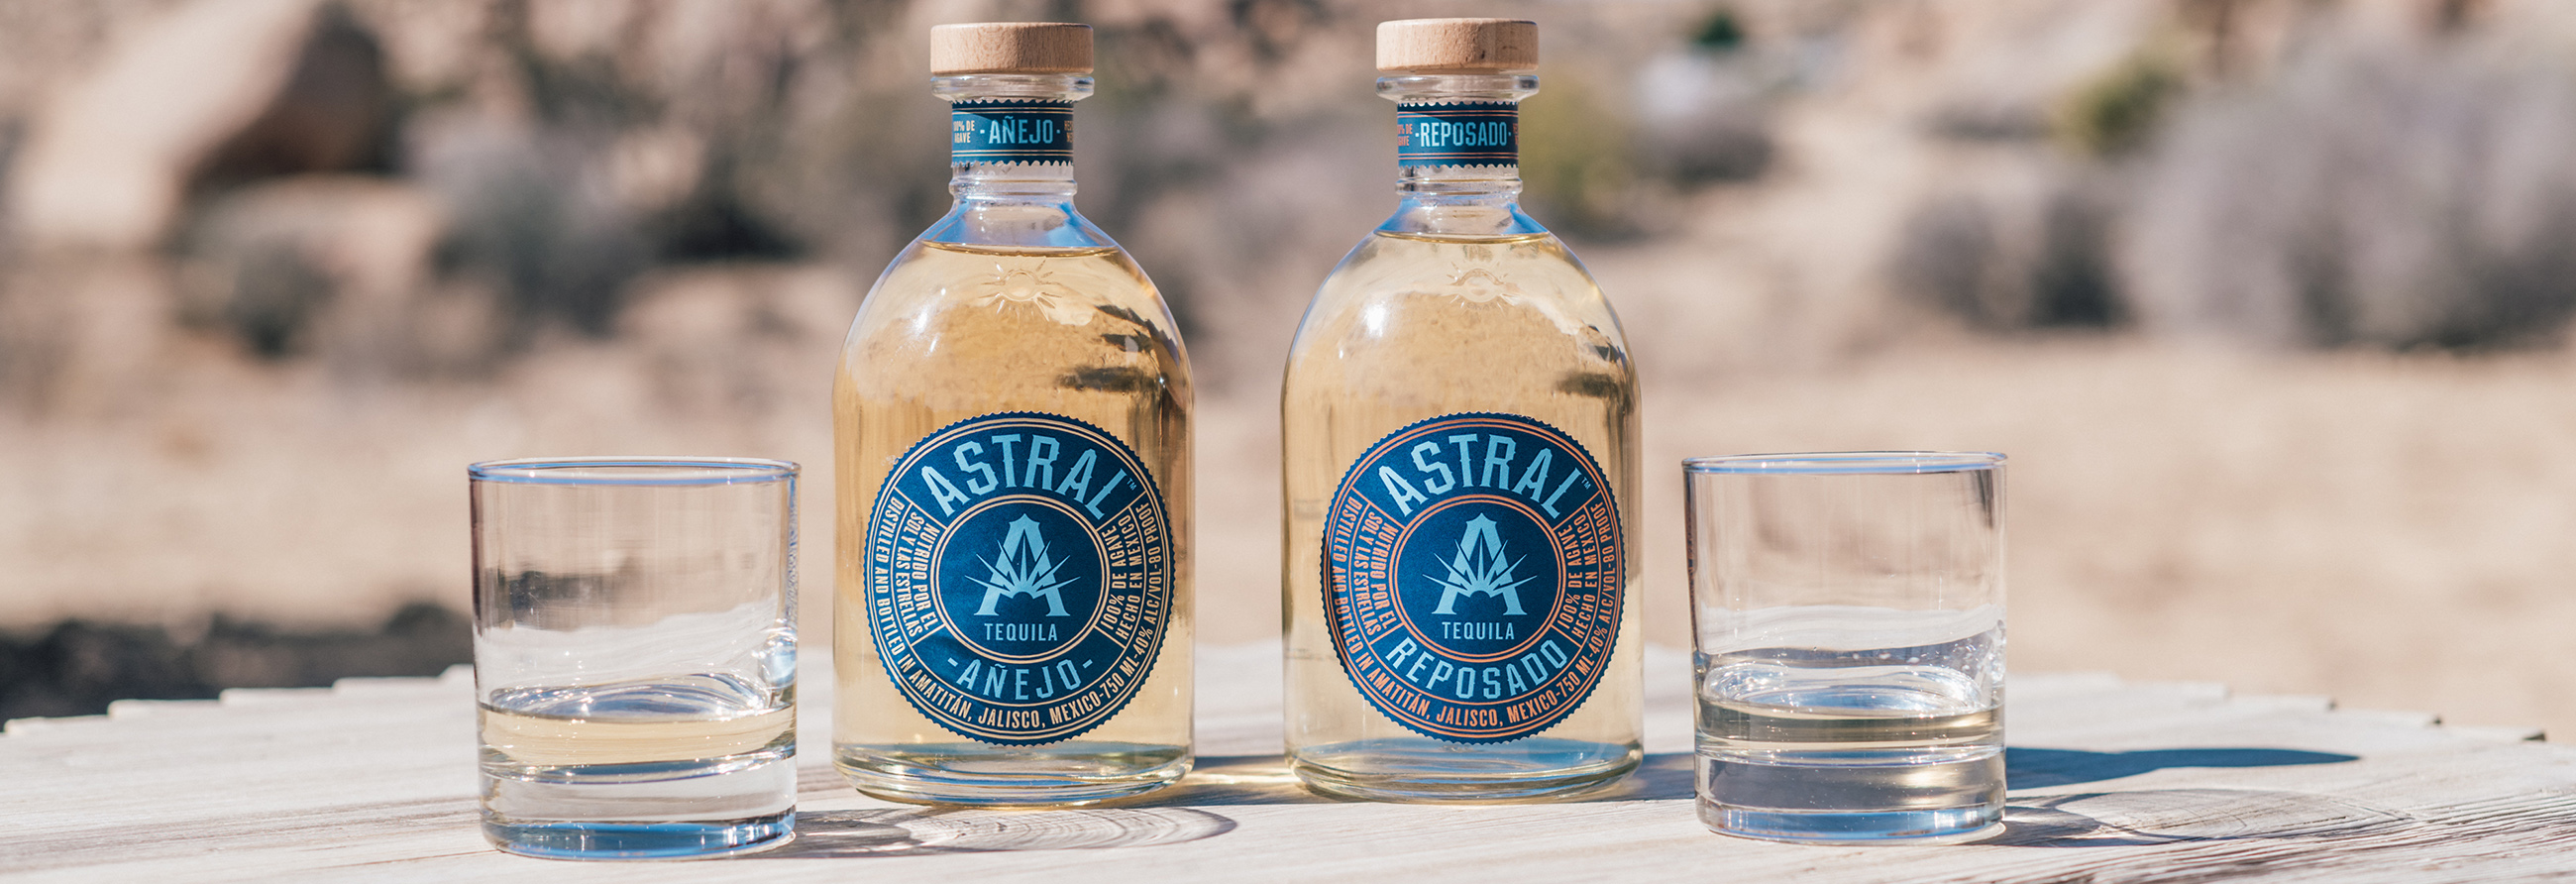 Astral Tequila banner